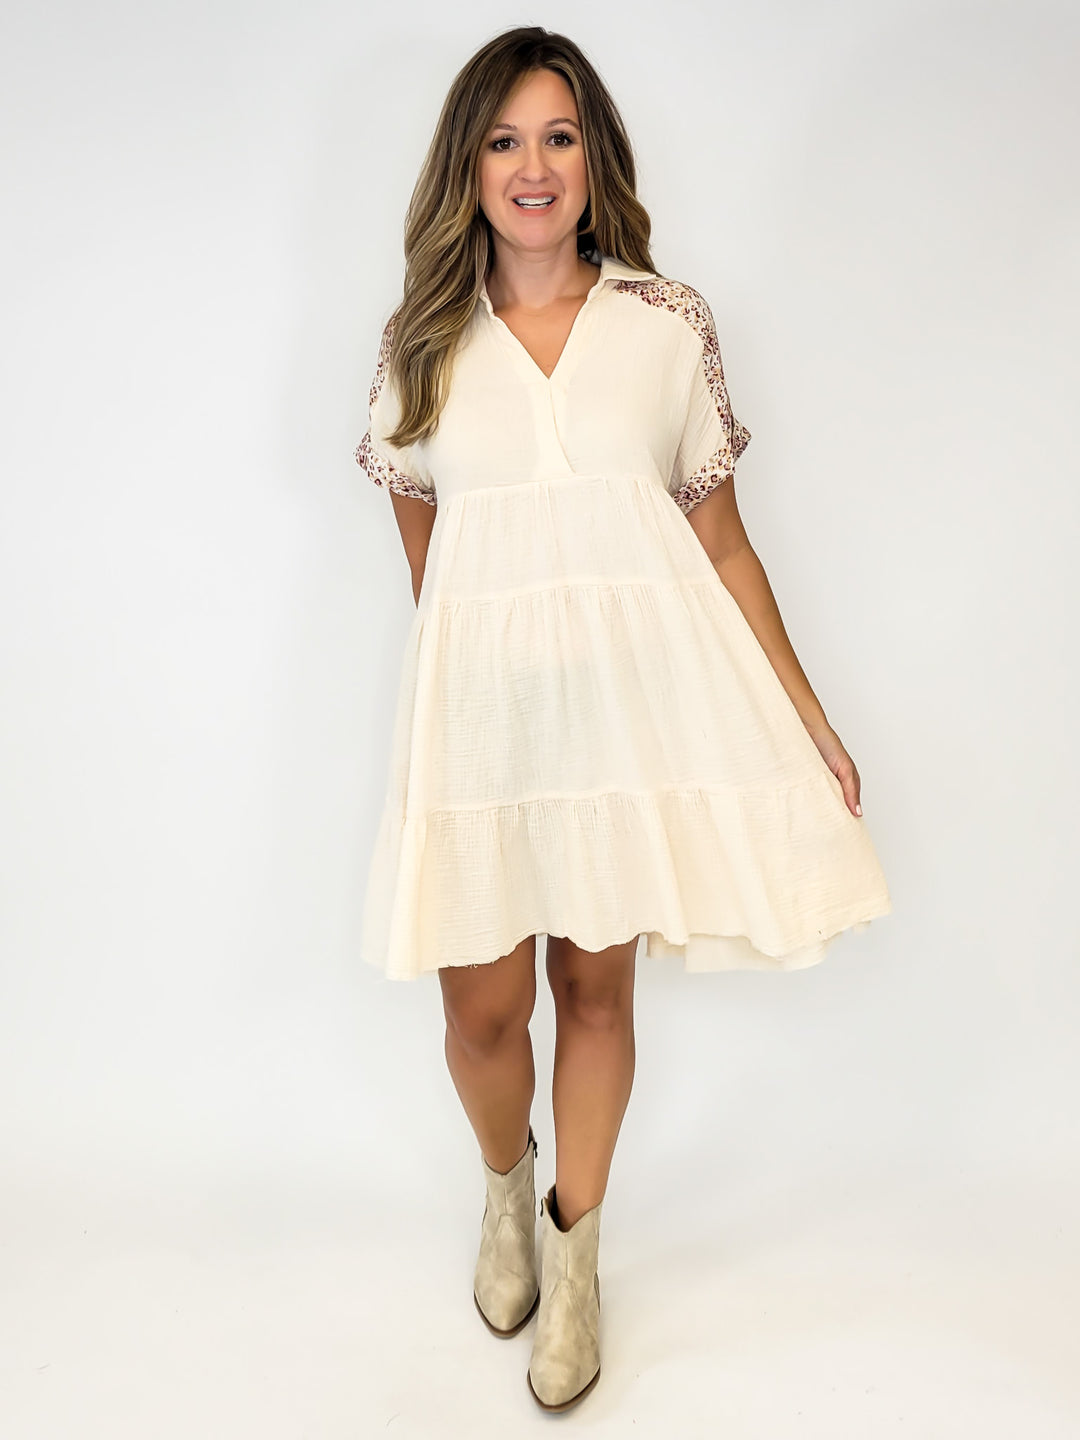 MIXED PRINT V-NECK COLLARED RUFFLE TIERED DRESS - CREAM